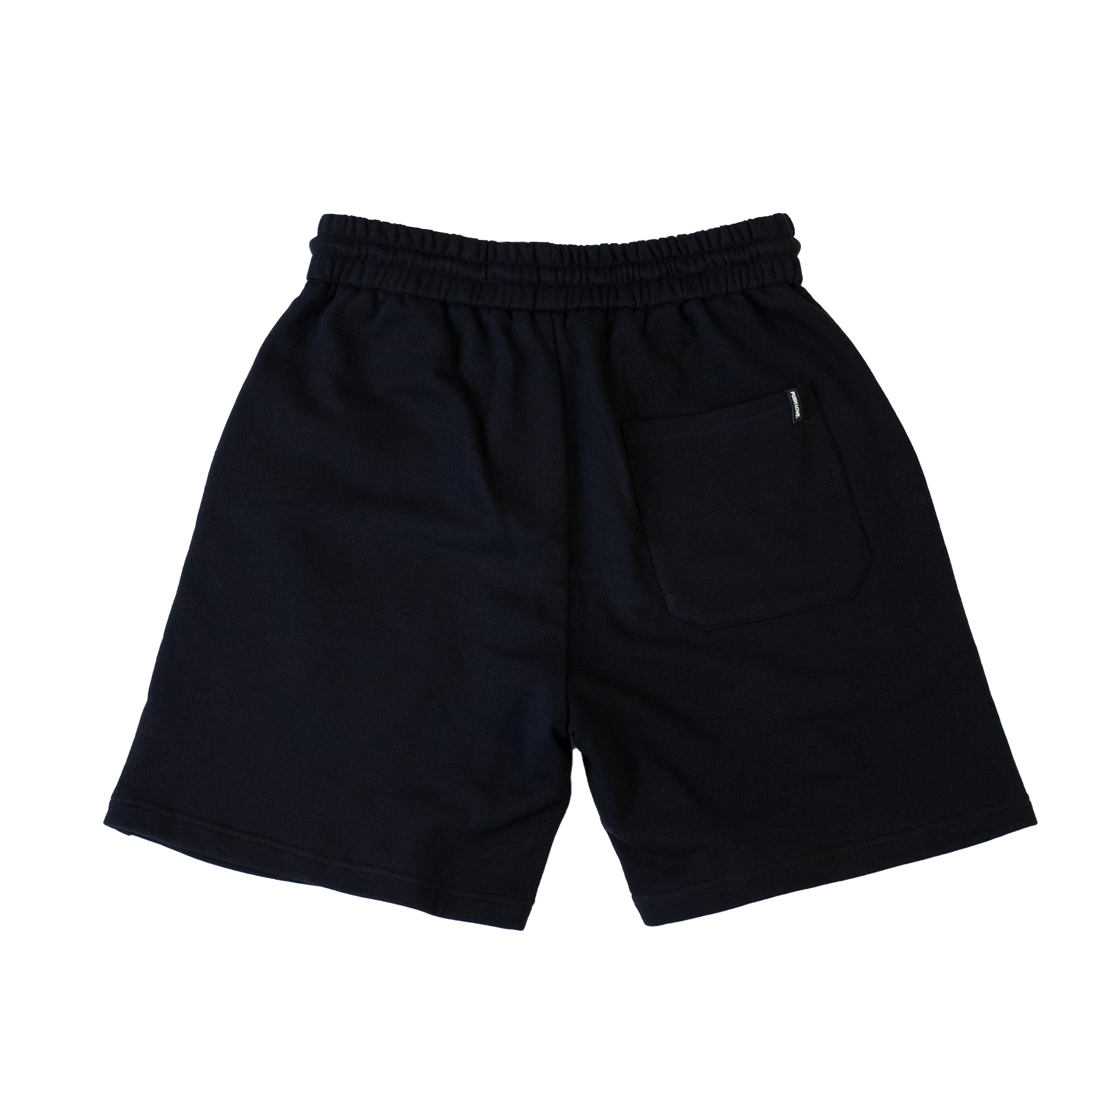 Founded Sweat Shorts